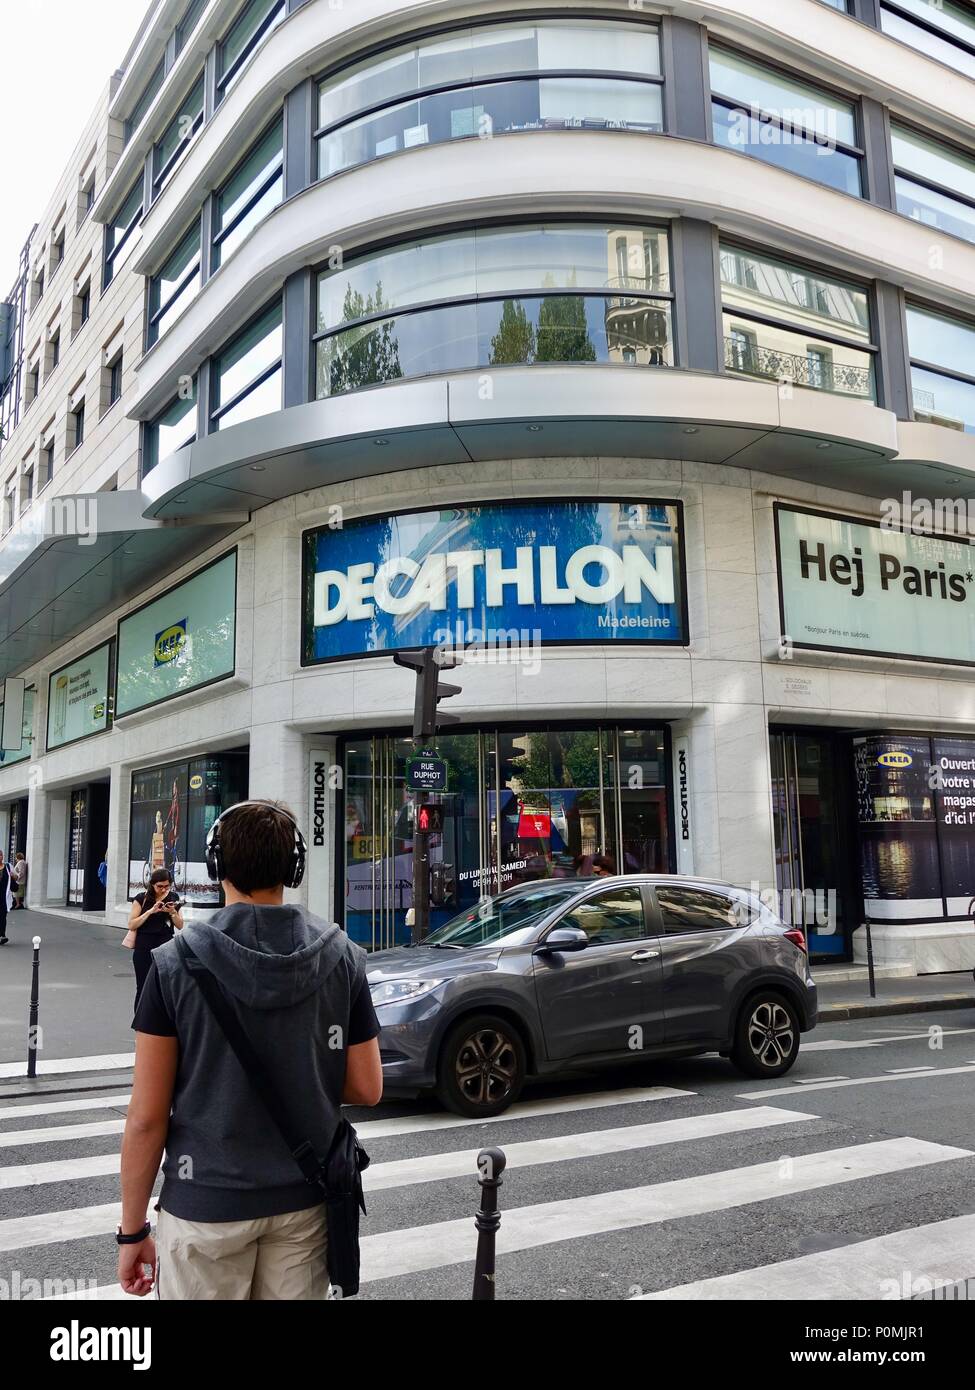 Decathlon Store France High Resolution Stock Photography and Images - Alamy